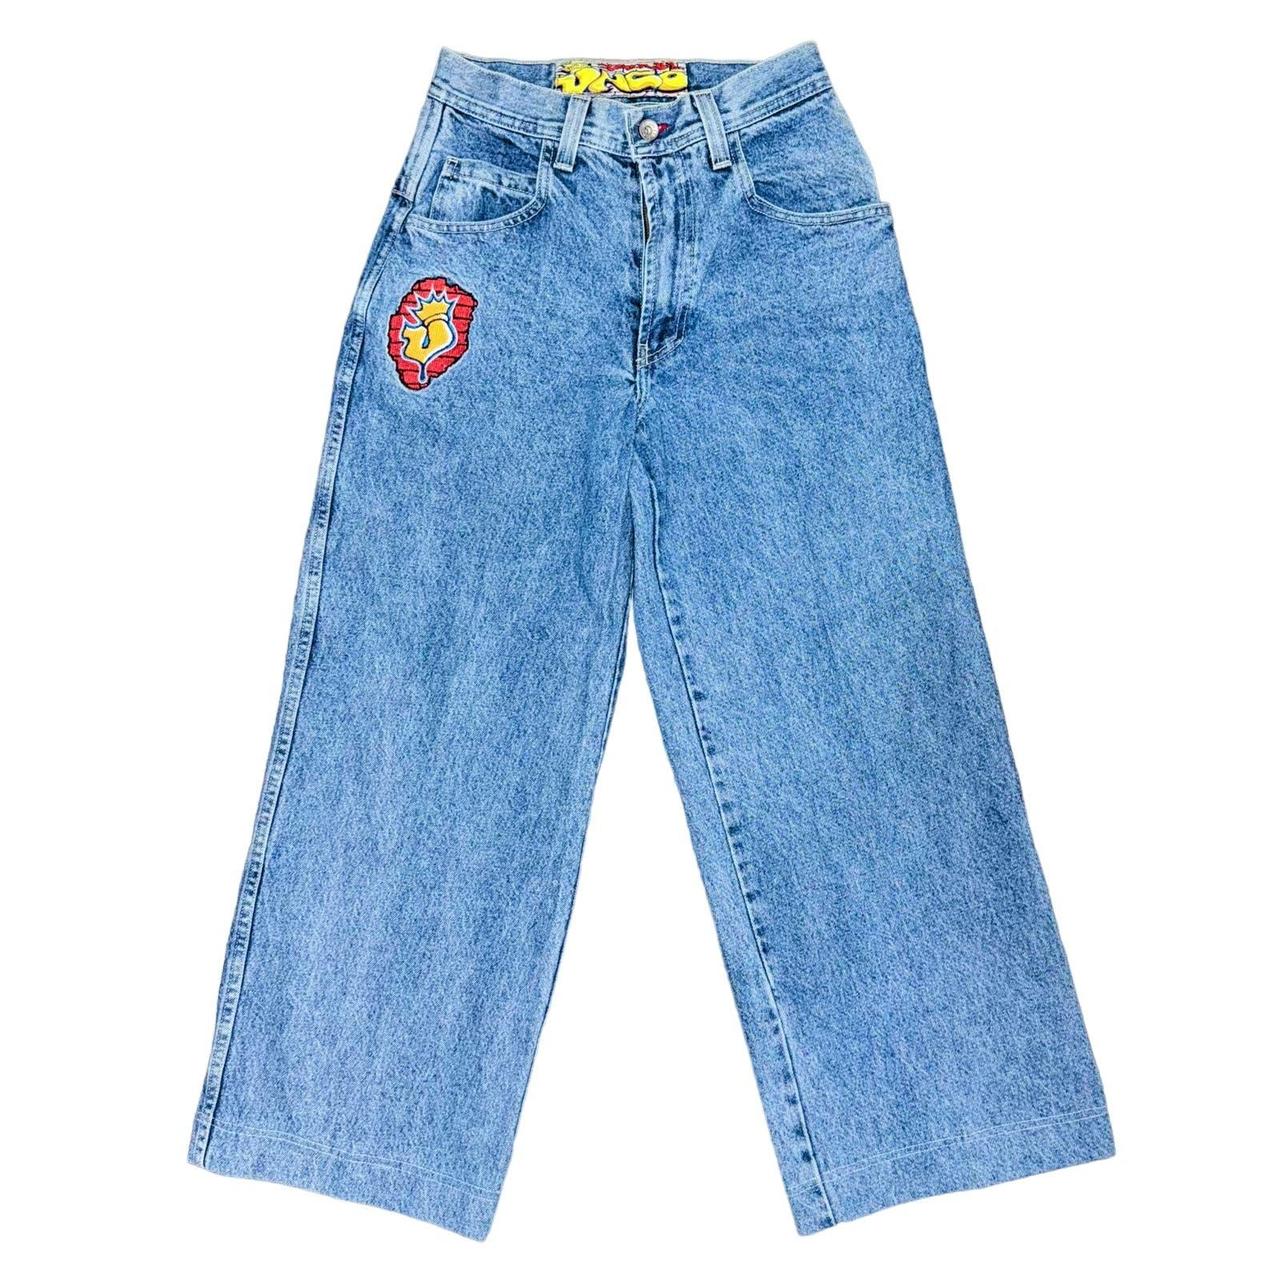 JNCO Jester 168 Excellent preowned... - Depop